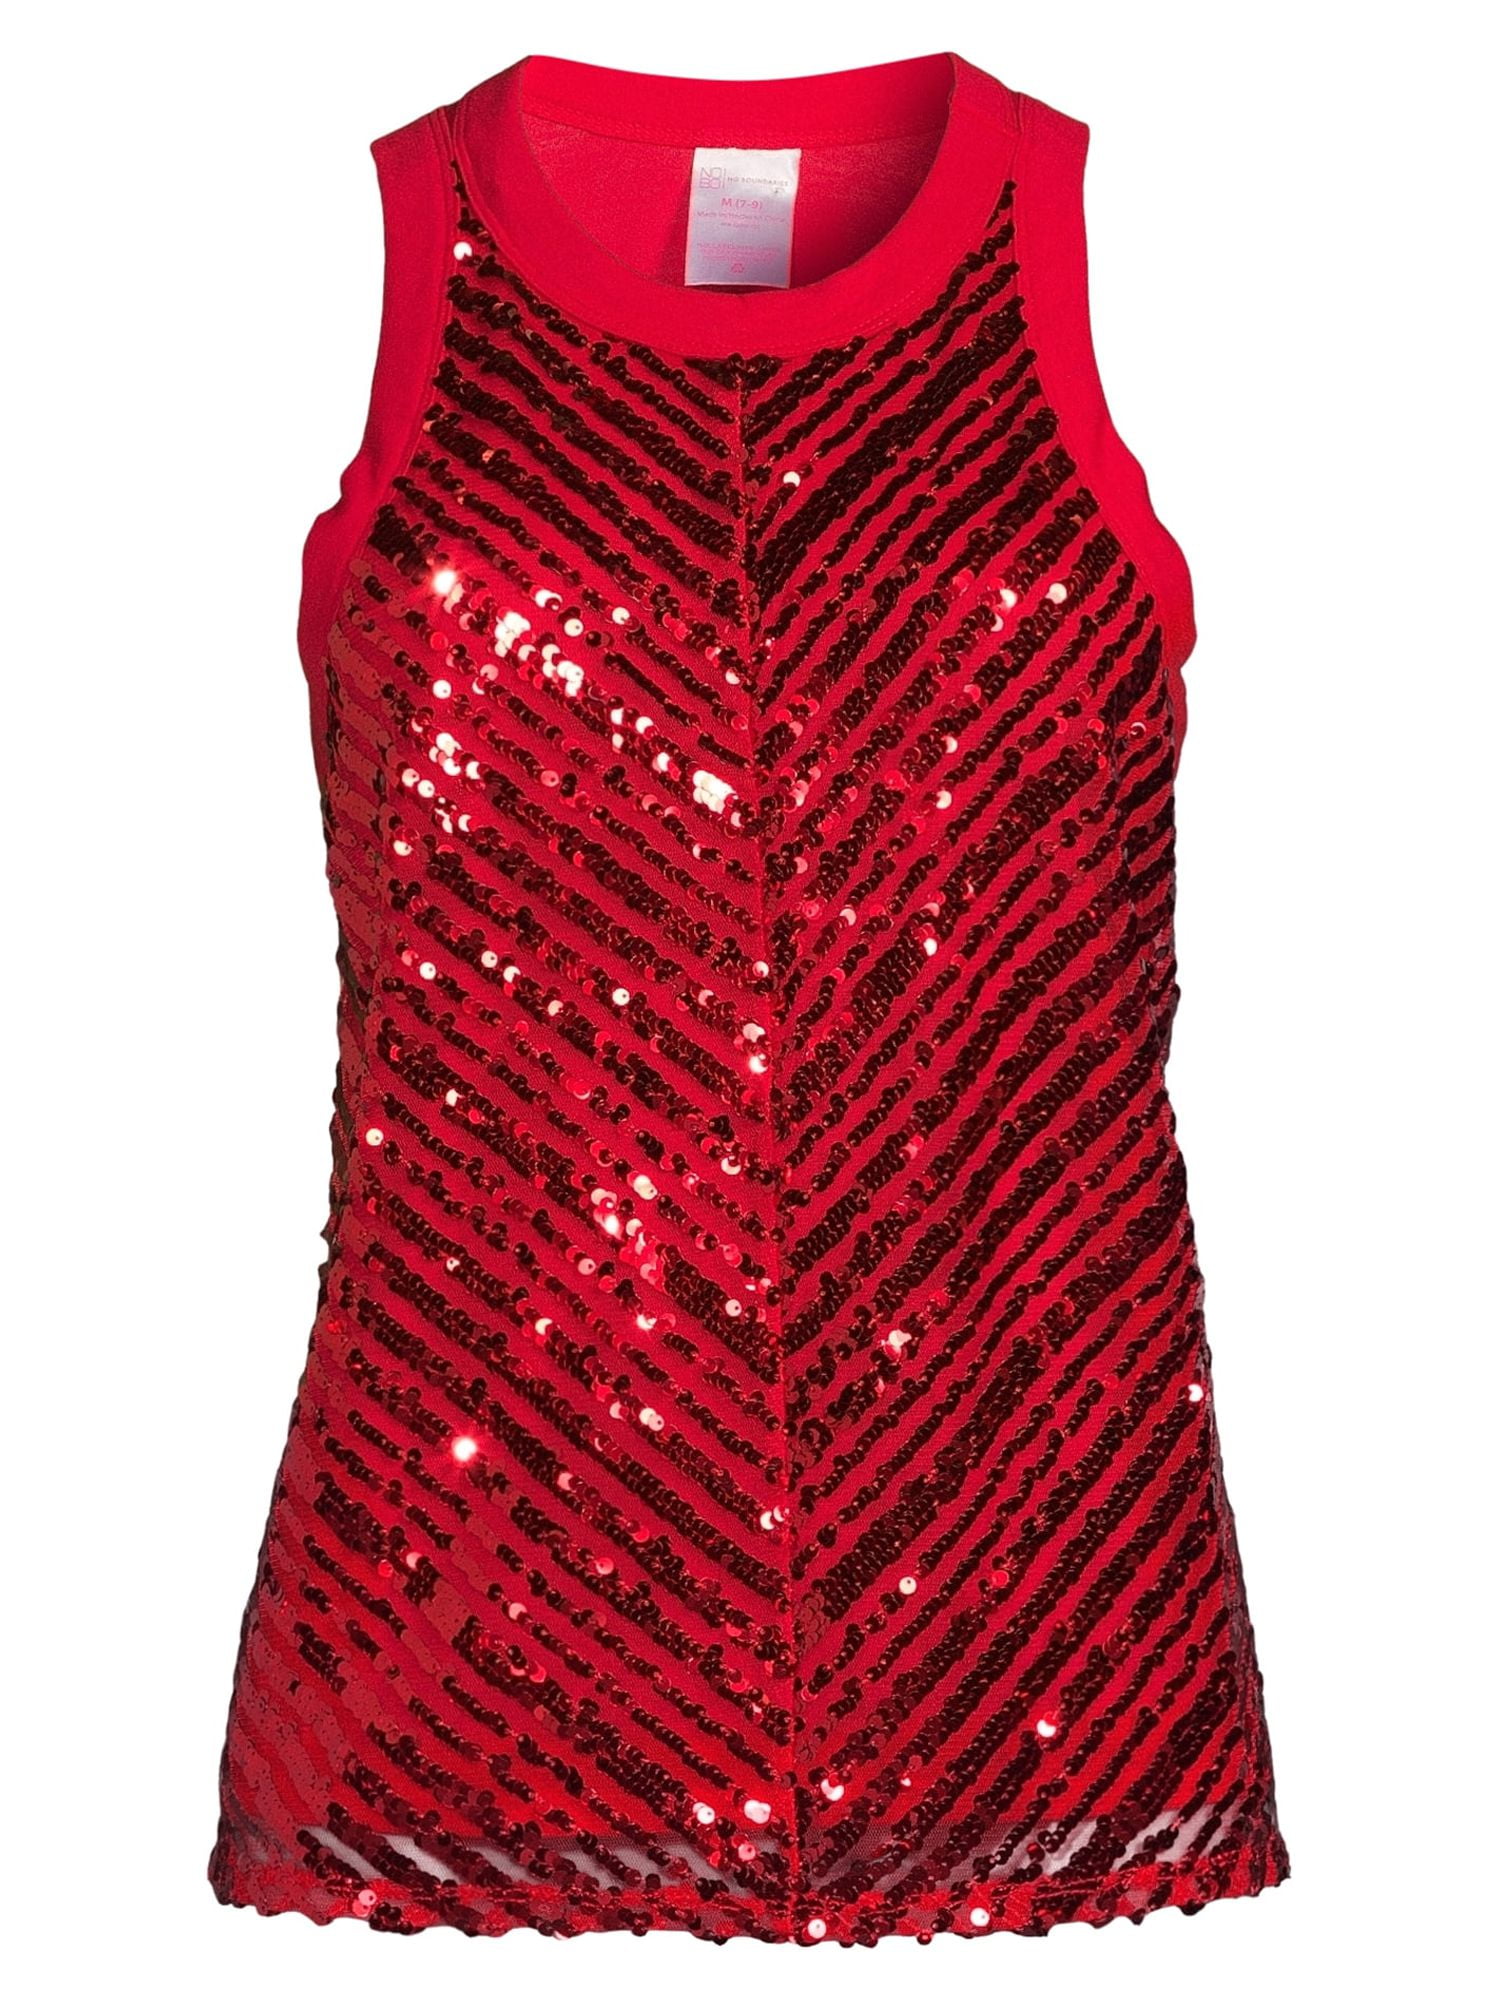 No Boundaries Women's Sequined Tank Top - $6 - From Brittany